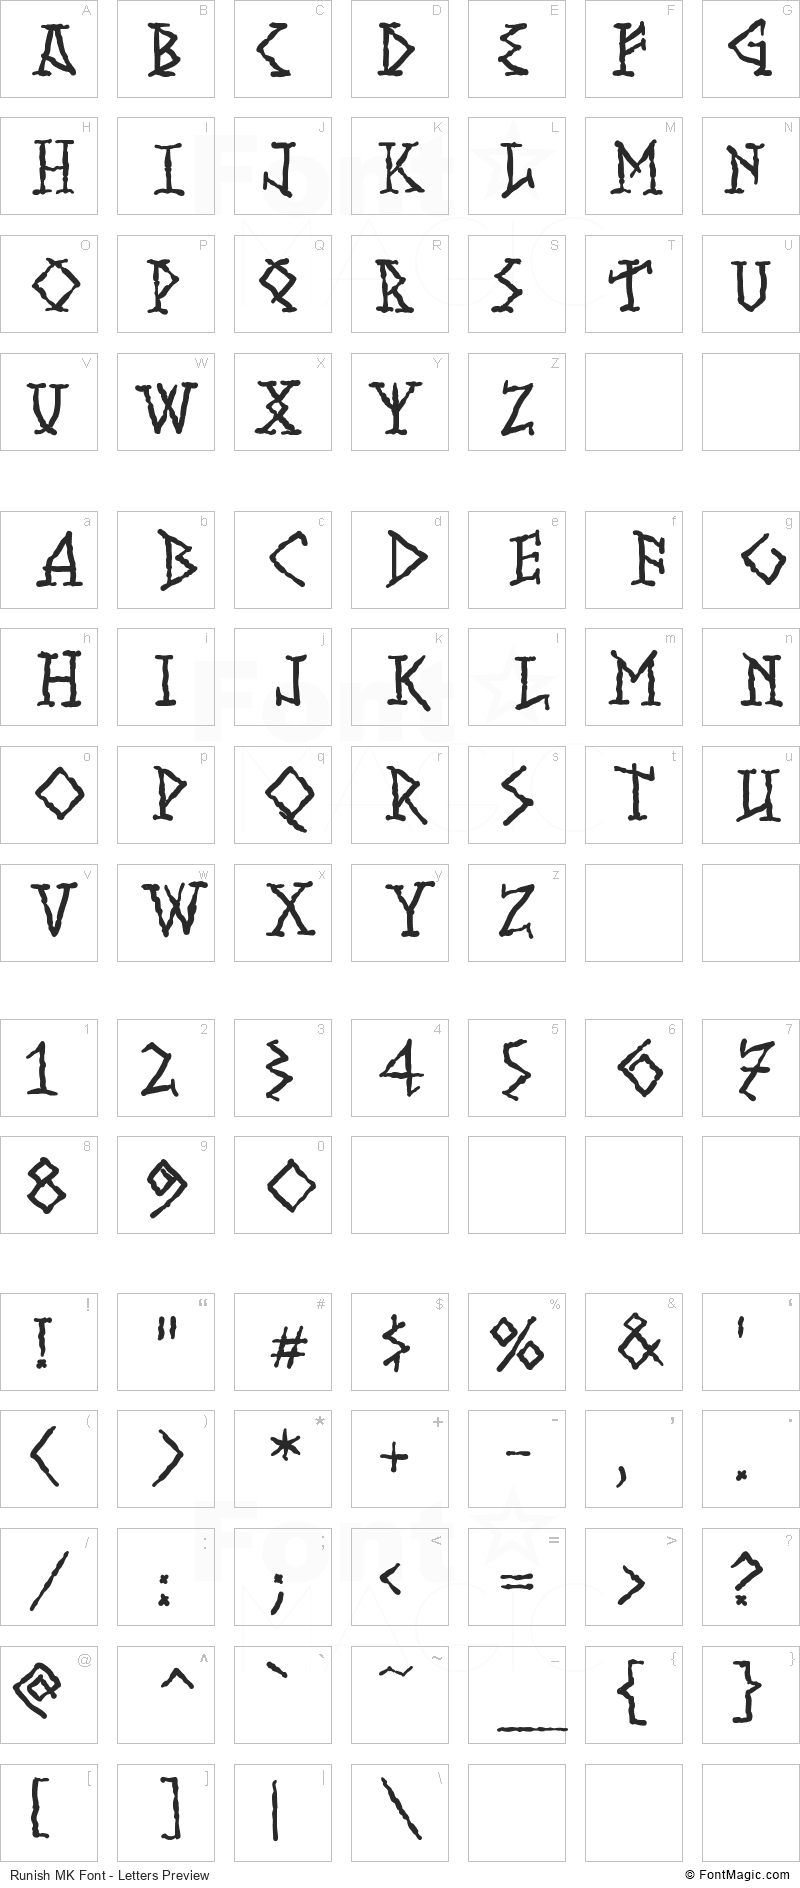 Runish MK Font - All Latters Preview Chart